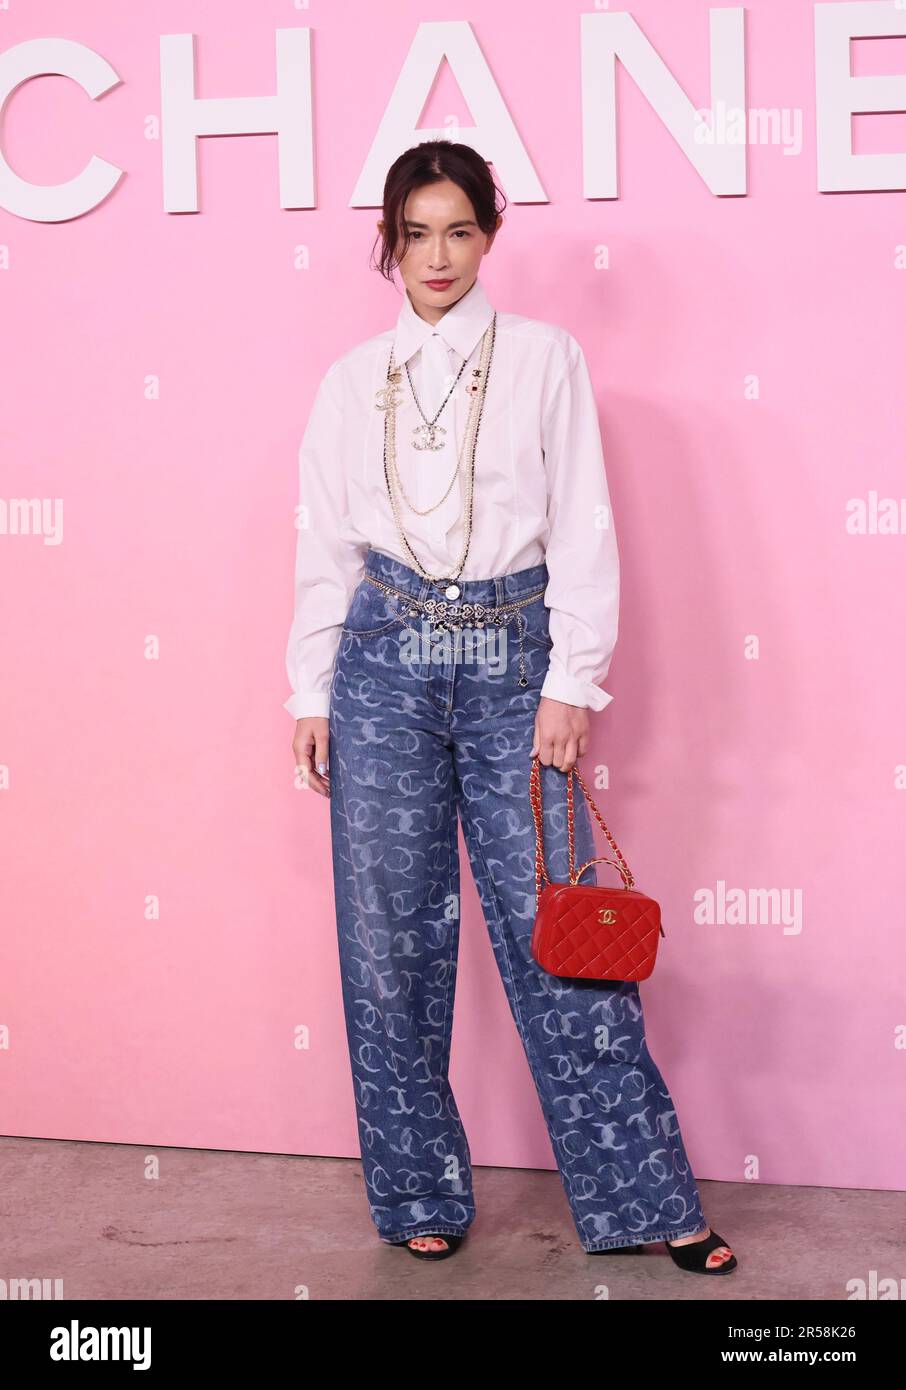 Tokyo, Japan. 1st June, 2023. Japanese actress Kyoko Hasegawa poses for a photo call at French luxury brand Chanel's 2022/23 Metiers d'Art collection in Tokyo on Thursday, June 1, 2023. (photo by Yoshio Tsunoda/AFLO) Stock Photo